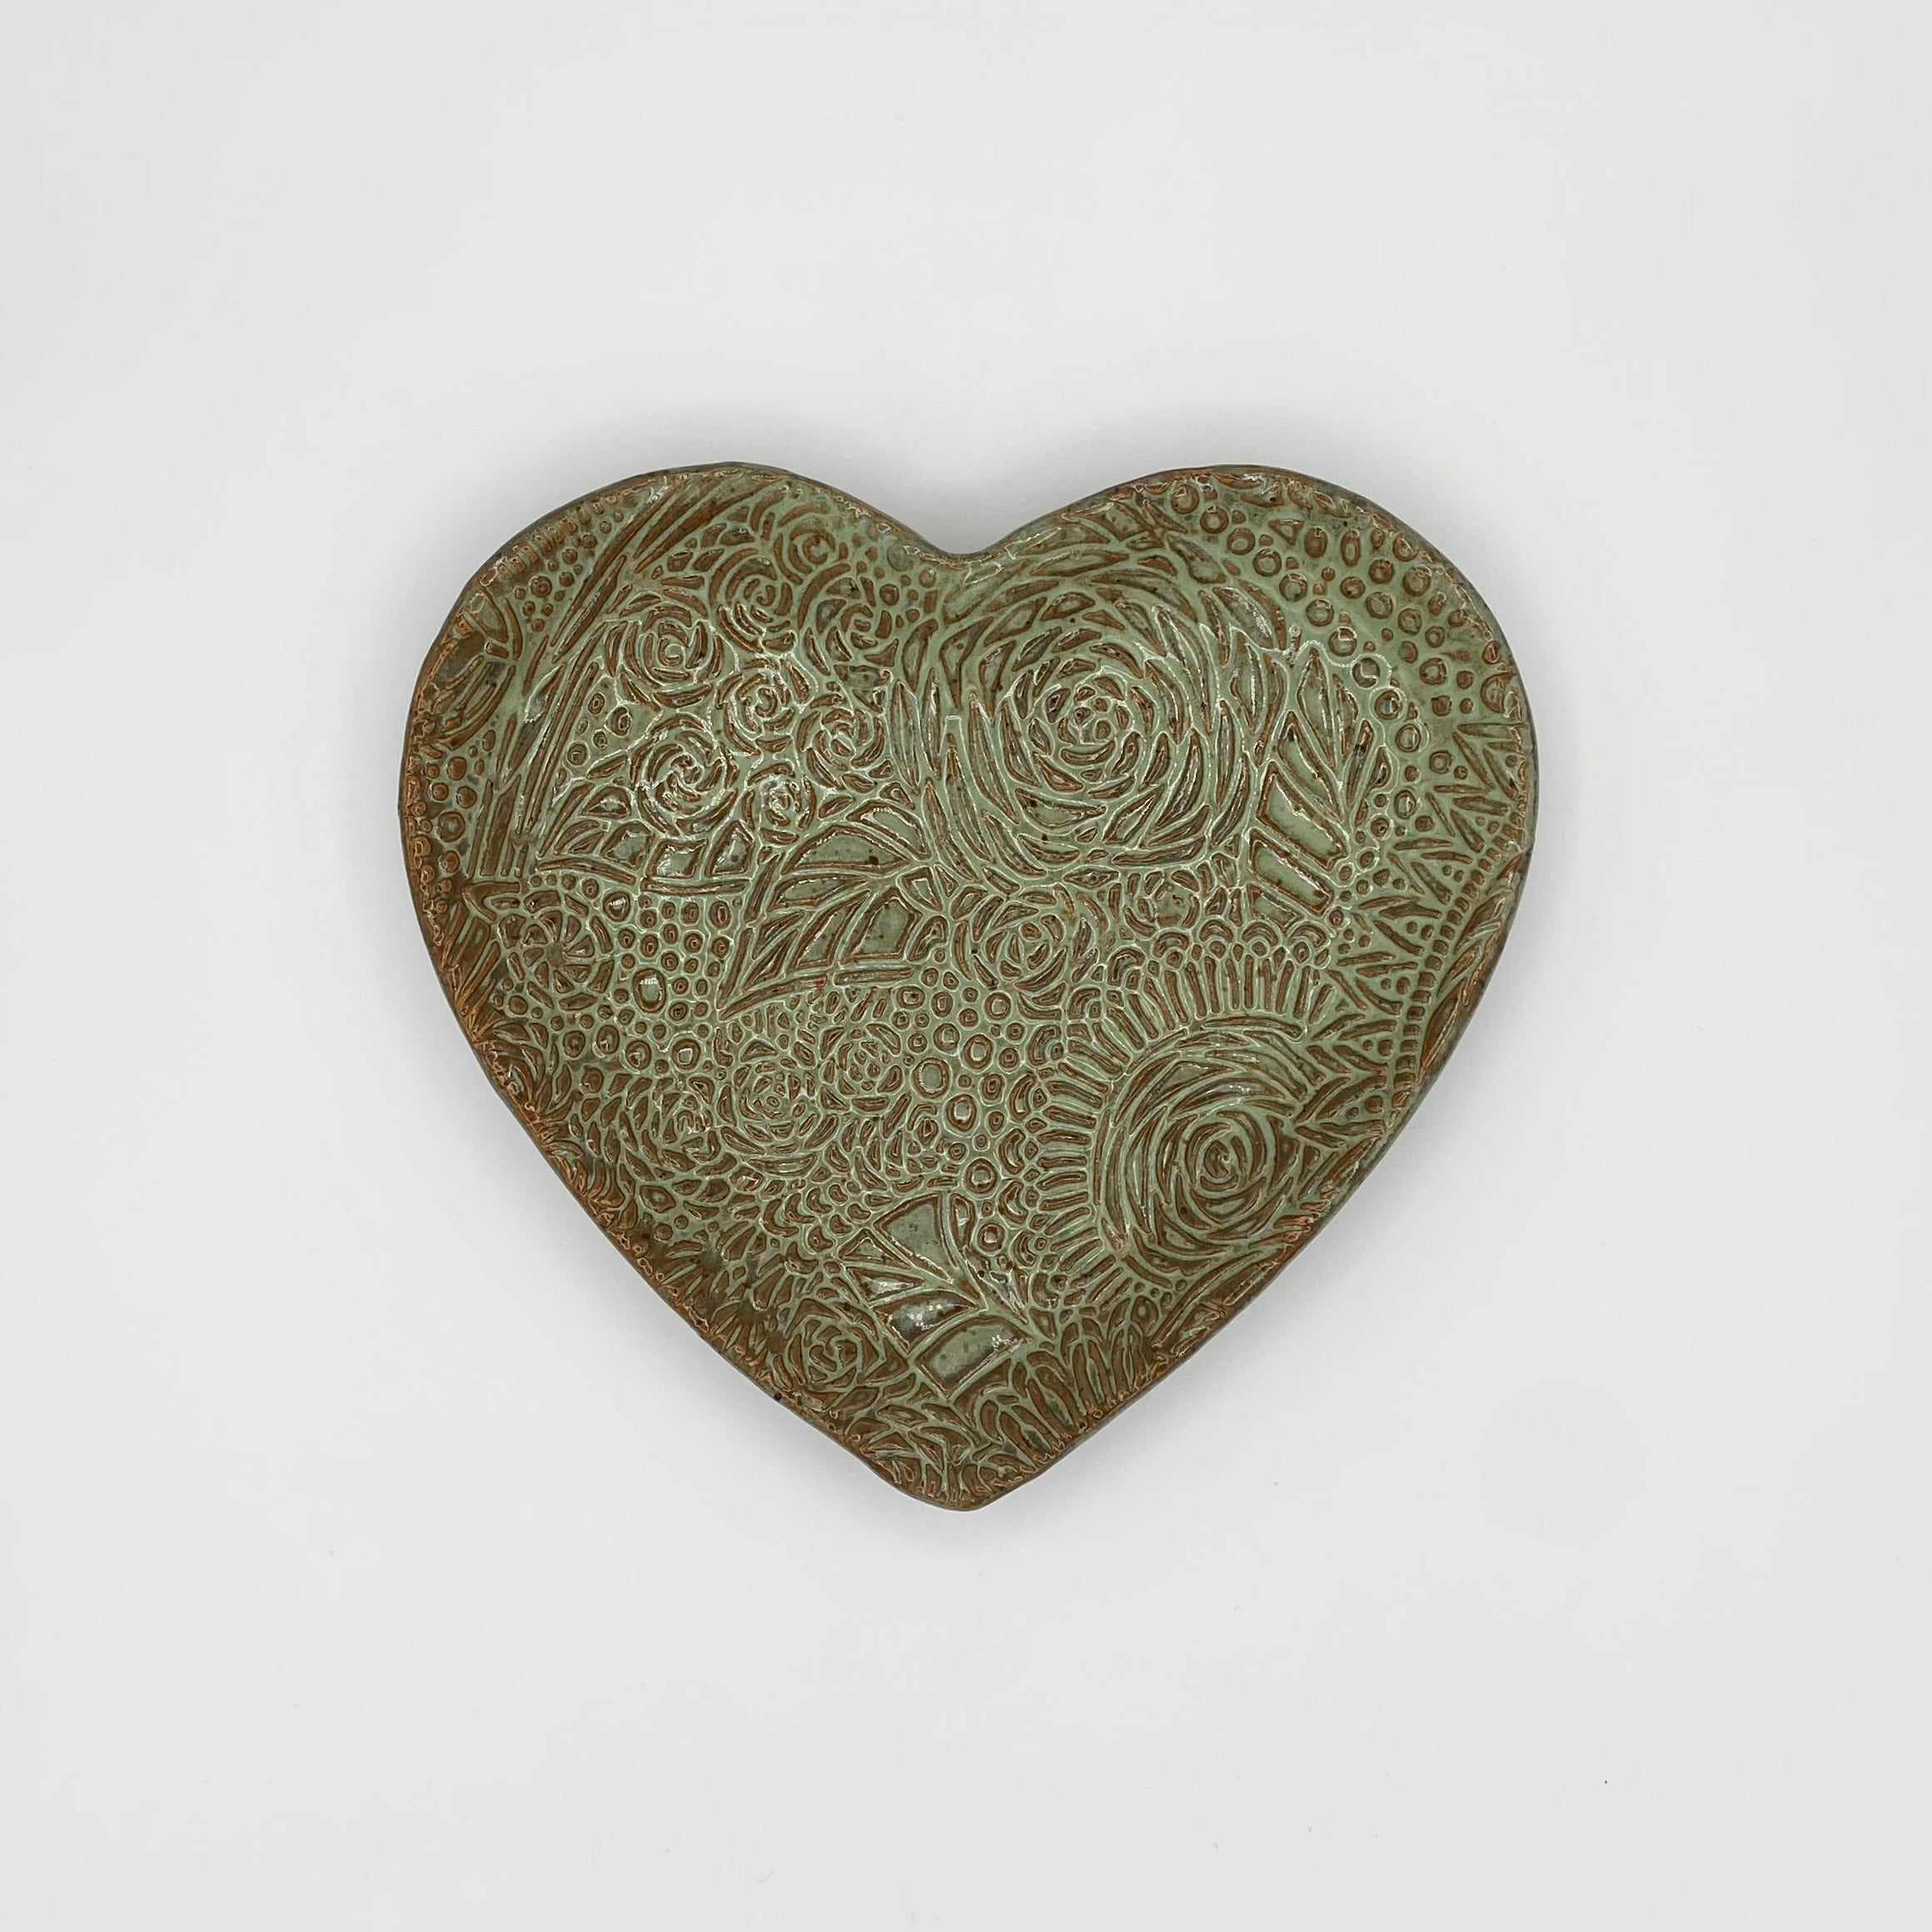 Heart Plate by Antithesis Designs